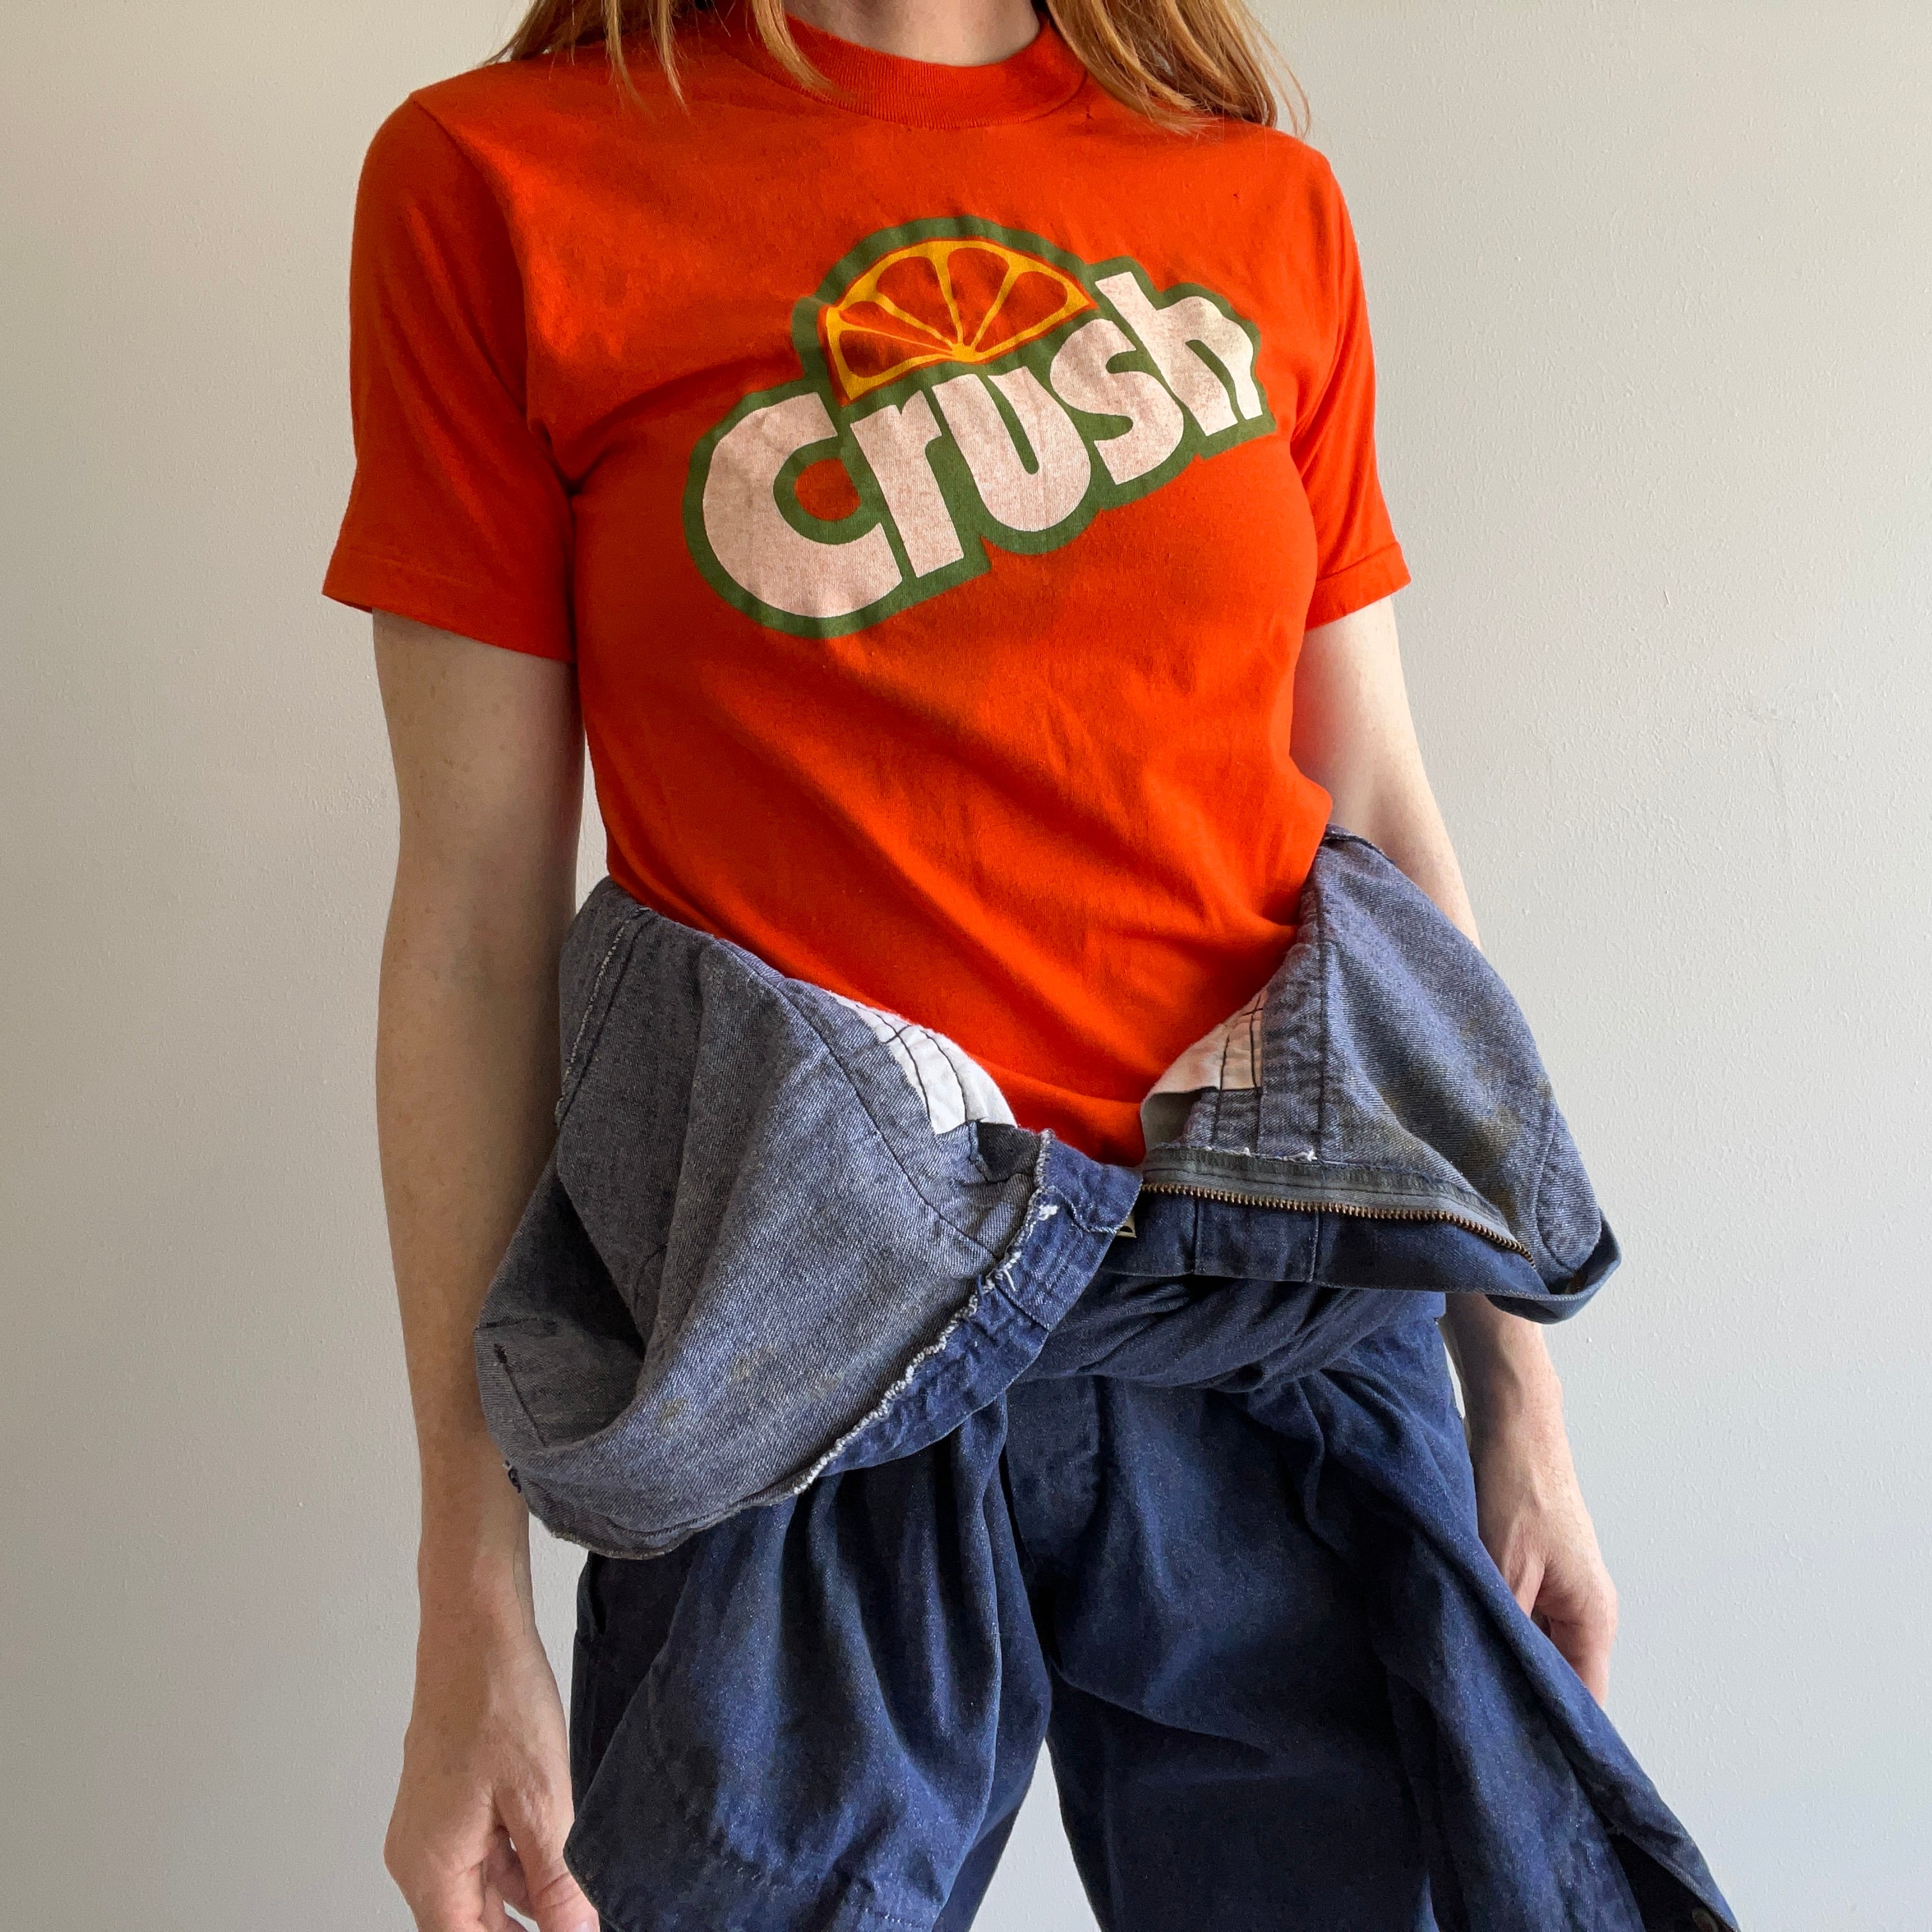 Orange Crush T-Shirt by Sheen - Stained – Red Co